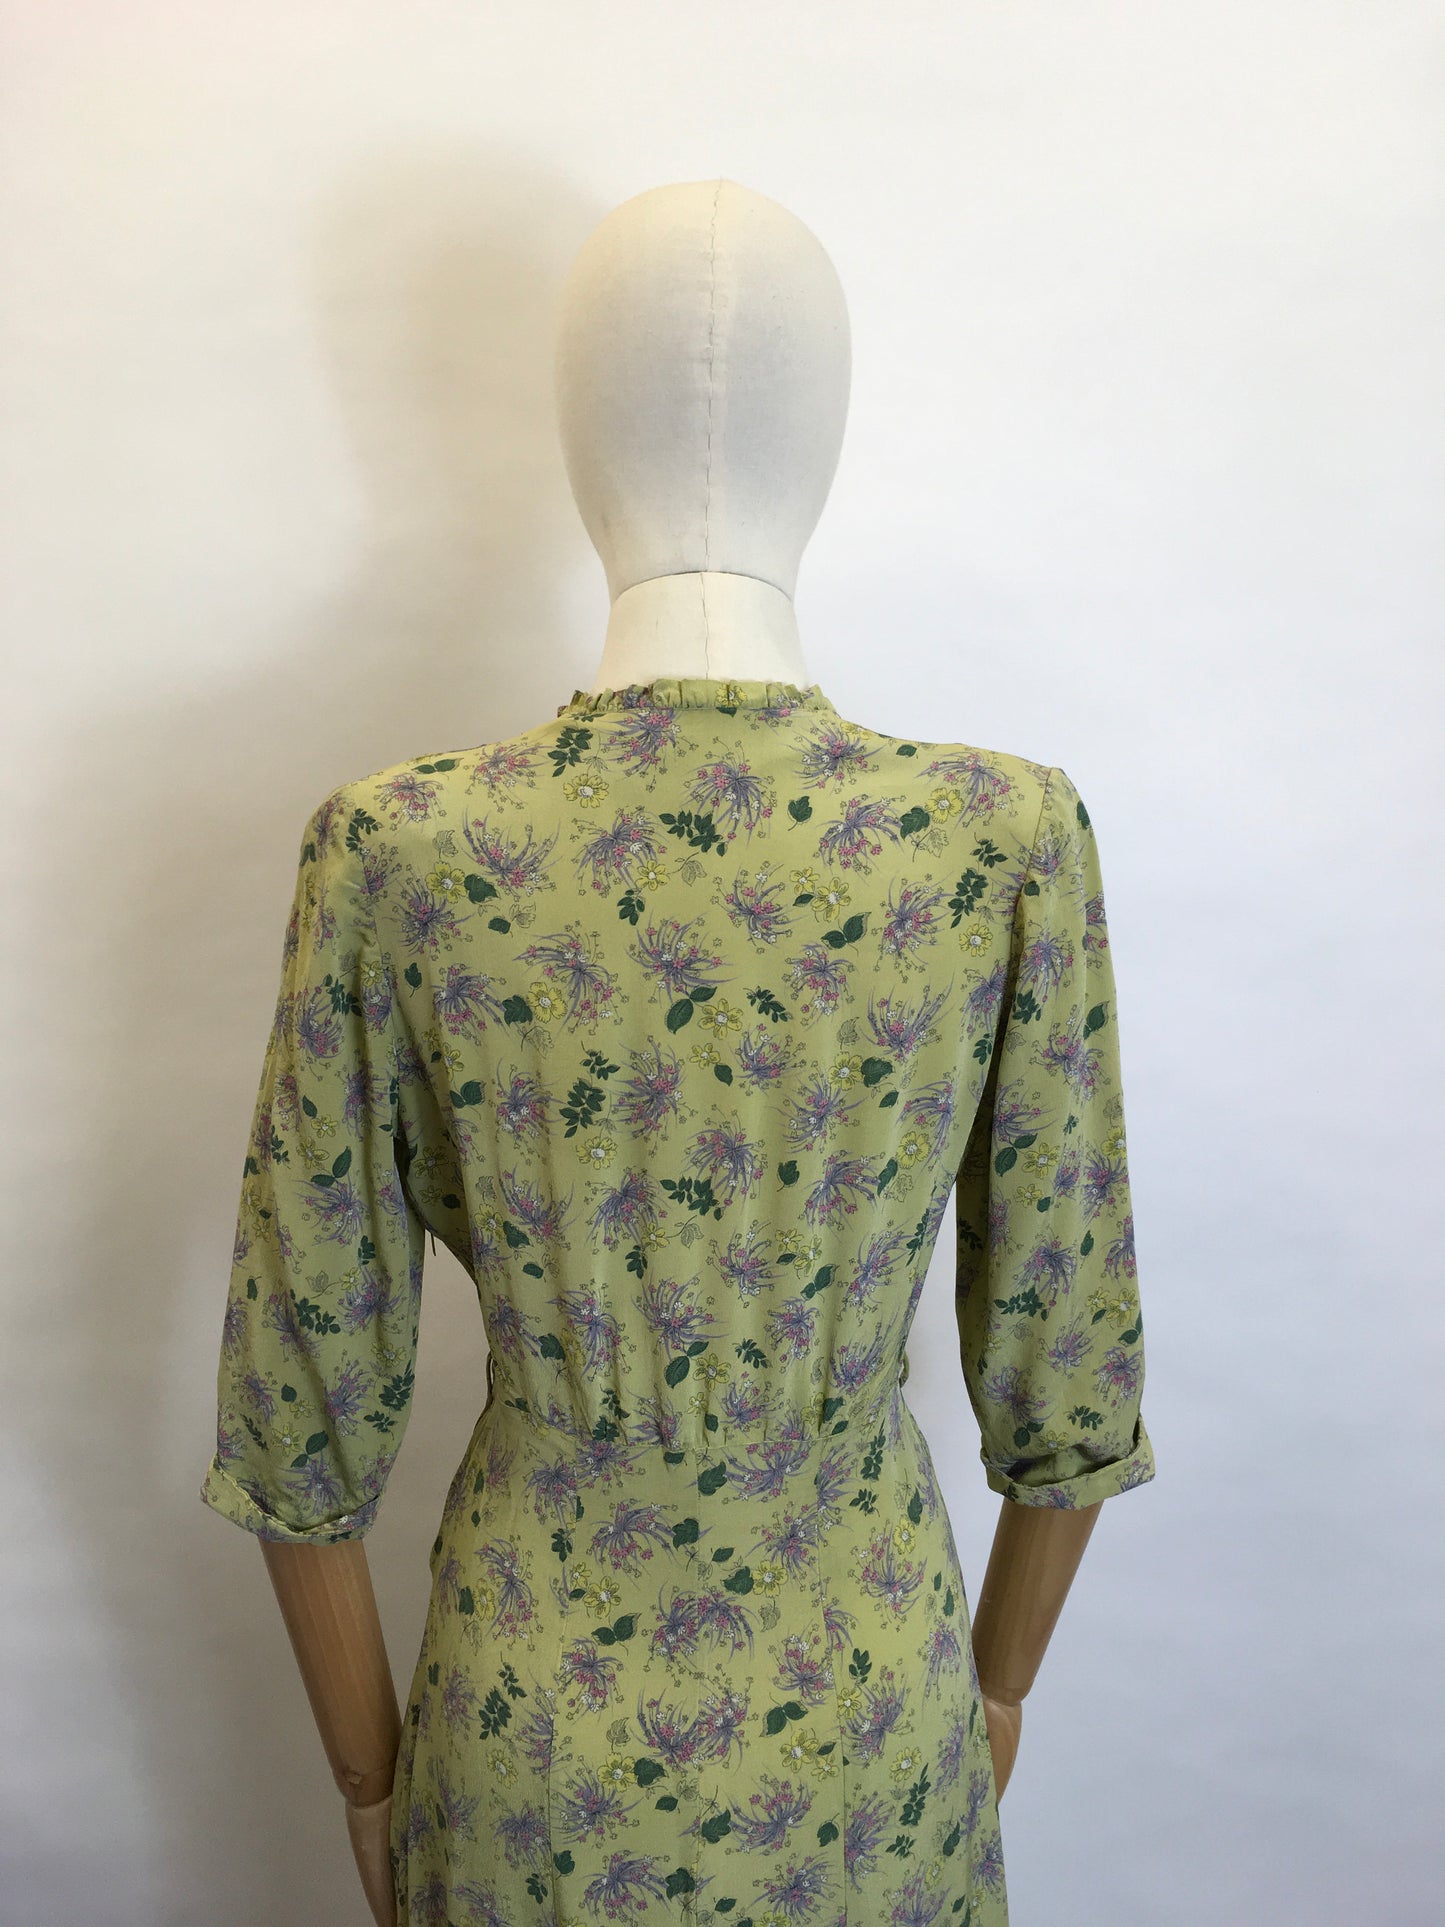 Original 1940’s Floral Day Dress - In a Beautiful Floral Crepe With a Warm Summer Colour Pallet